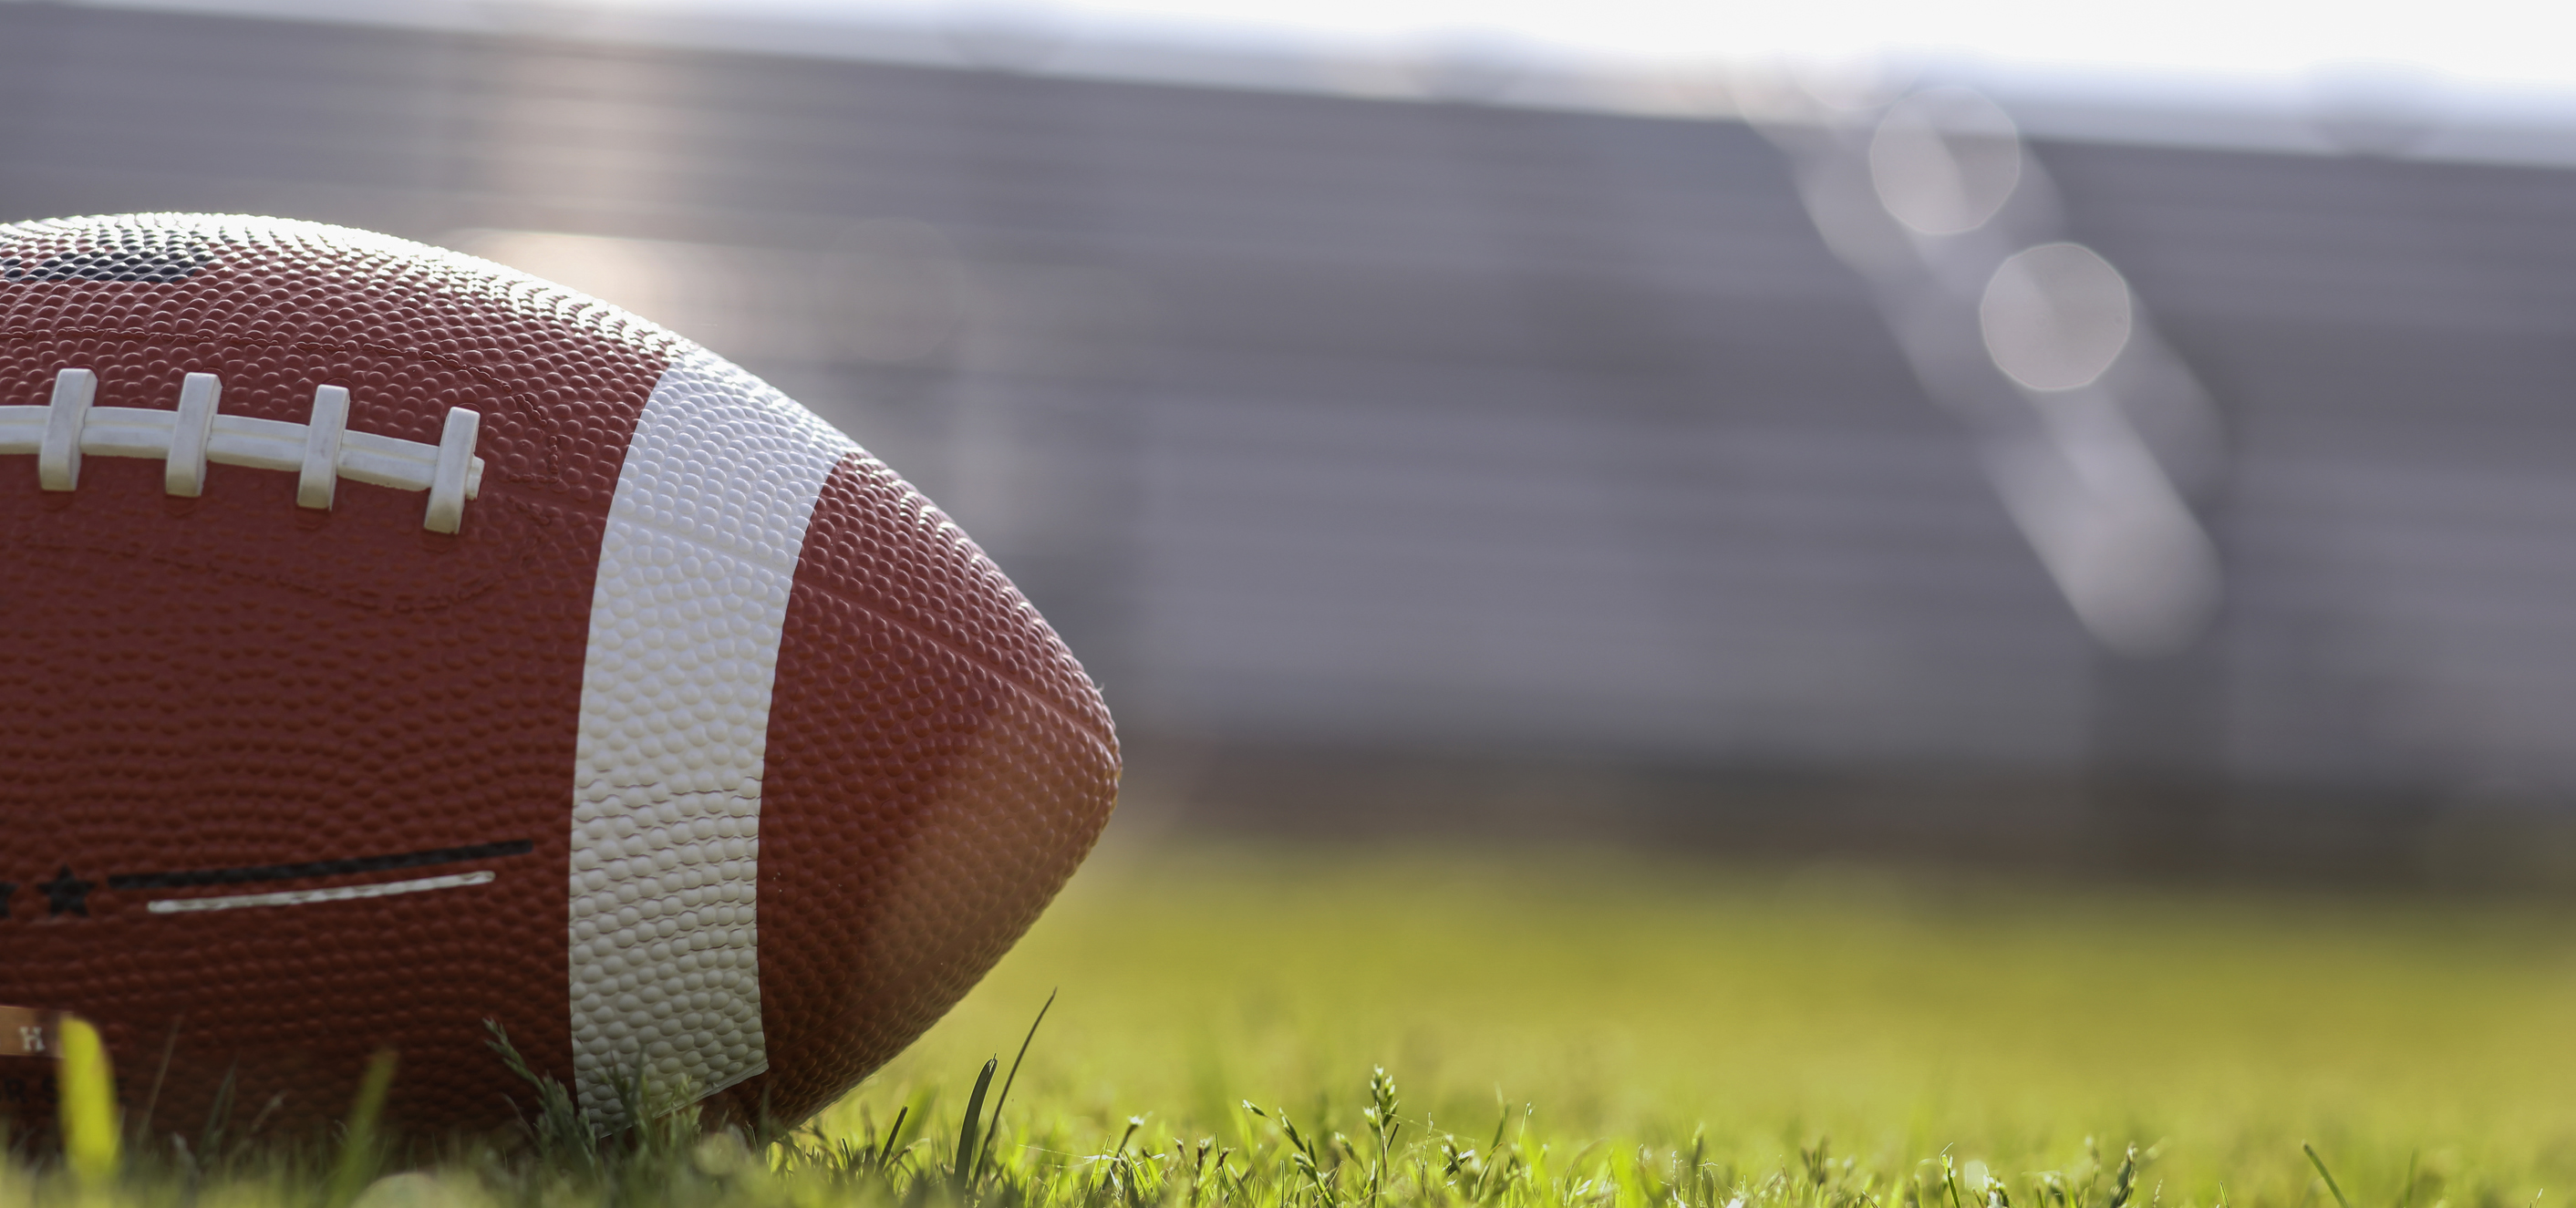 A close up shot of a football on the left, placed in the middle of a football field, with bleachers in the background and out of focus.